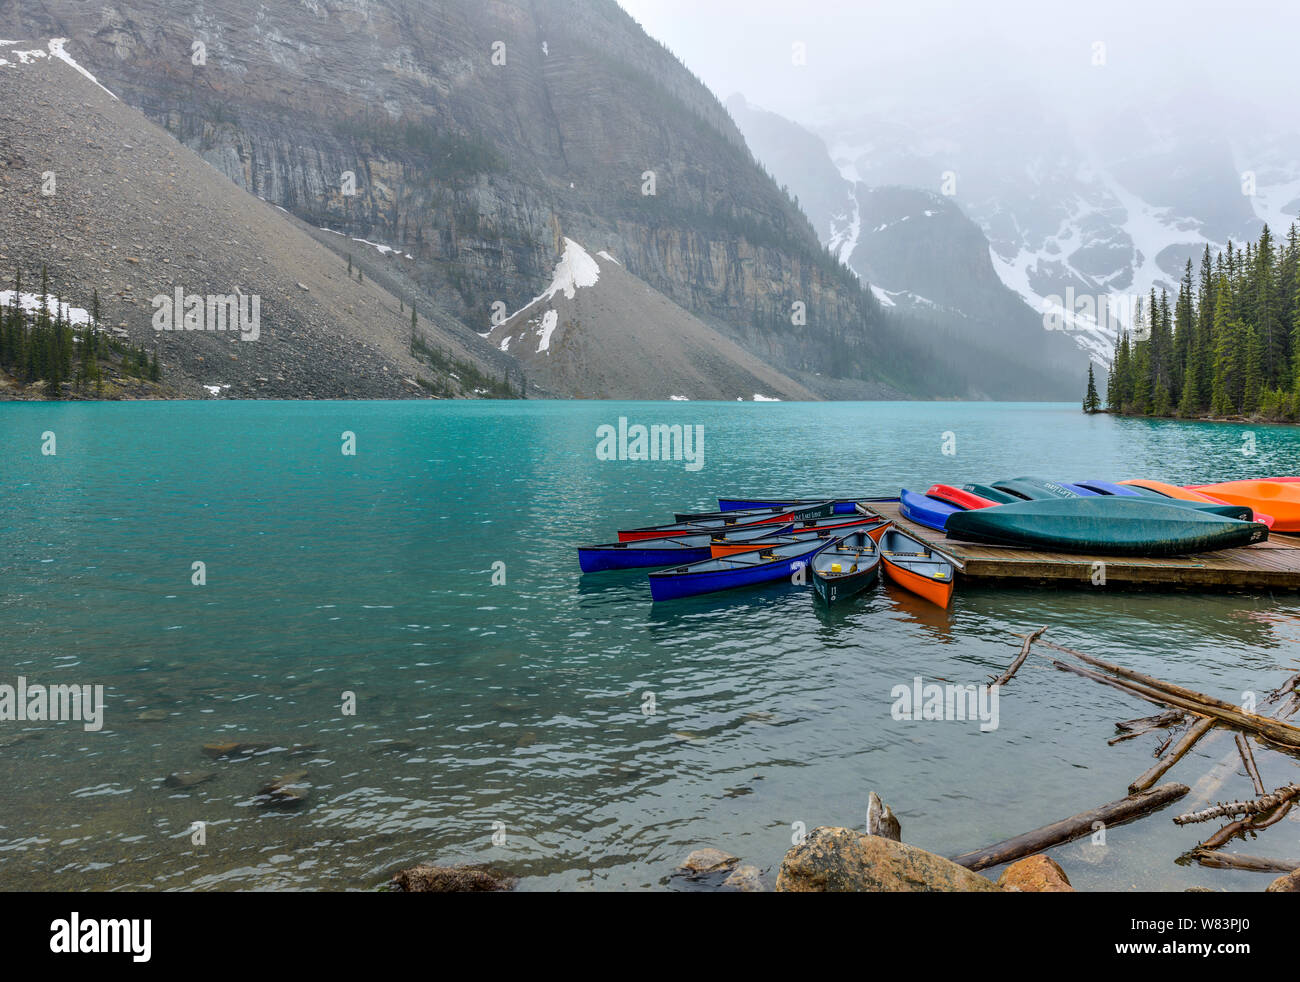 Boat Dock - A snowy and foggy Spring day view of boat dock at Moraine Lake, Banff National Park, Alberta, Canada. Stock Photo